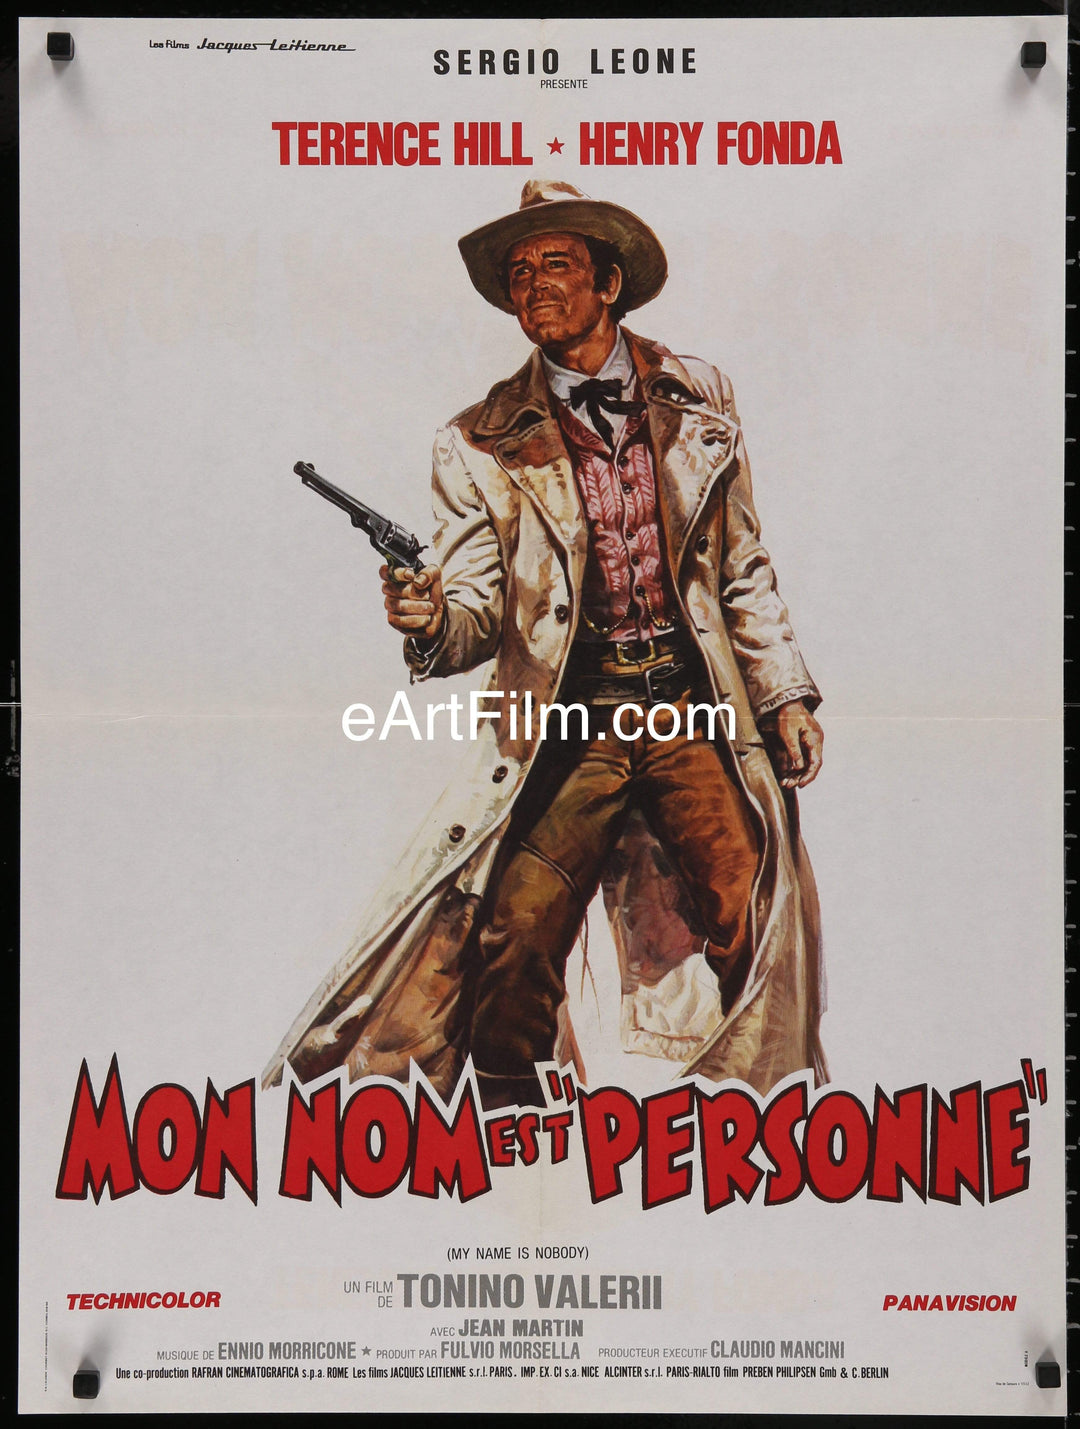 eArtFilm.com French Affiche Movie Poster (23"x32") My Name Is Nobody Henry Fonda Terence Hill Sergio Leone Casaro artwork R80's